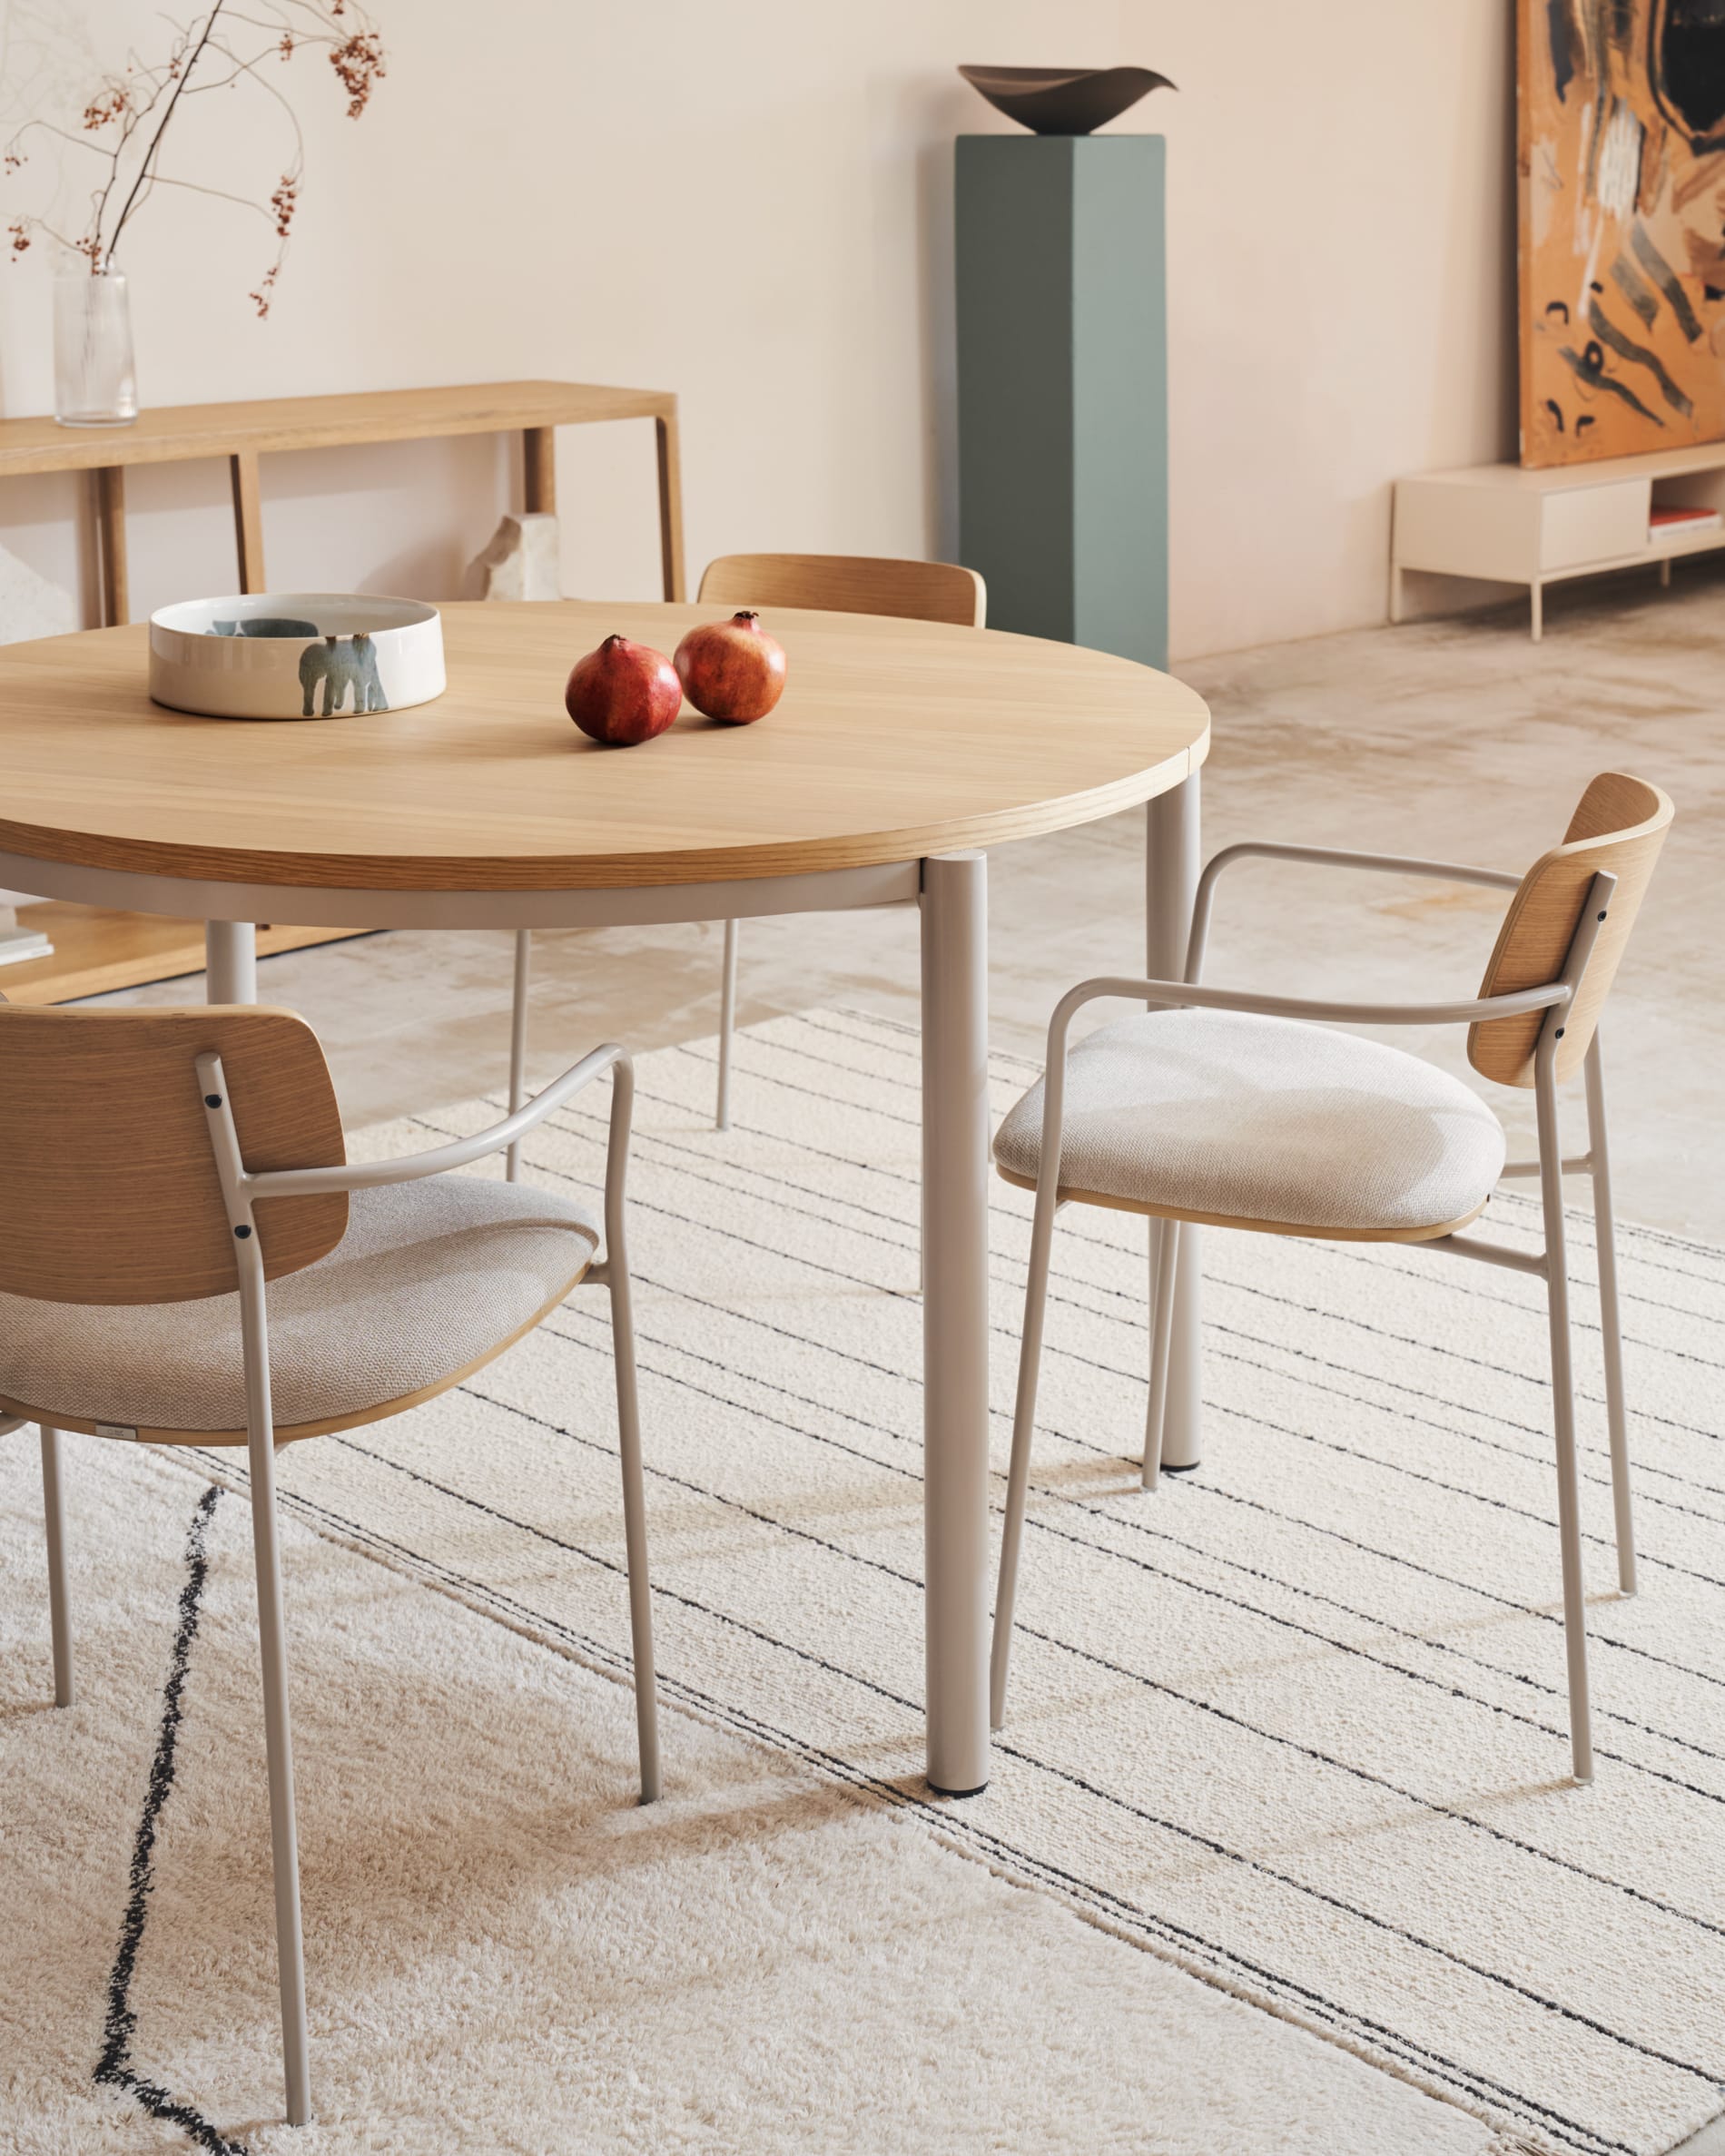 Montuiri extendable round table in oak veneer and steel legs with grey finish, Ø 120 (200) cm